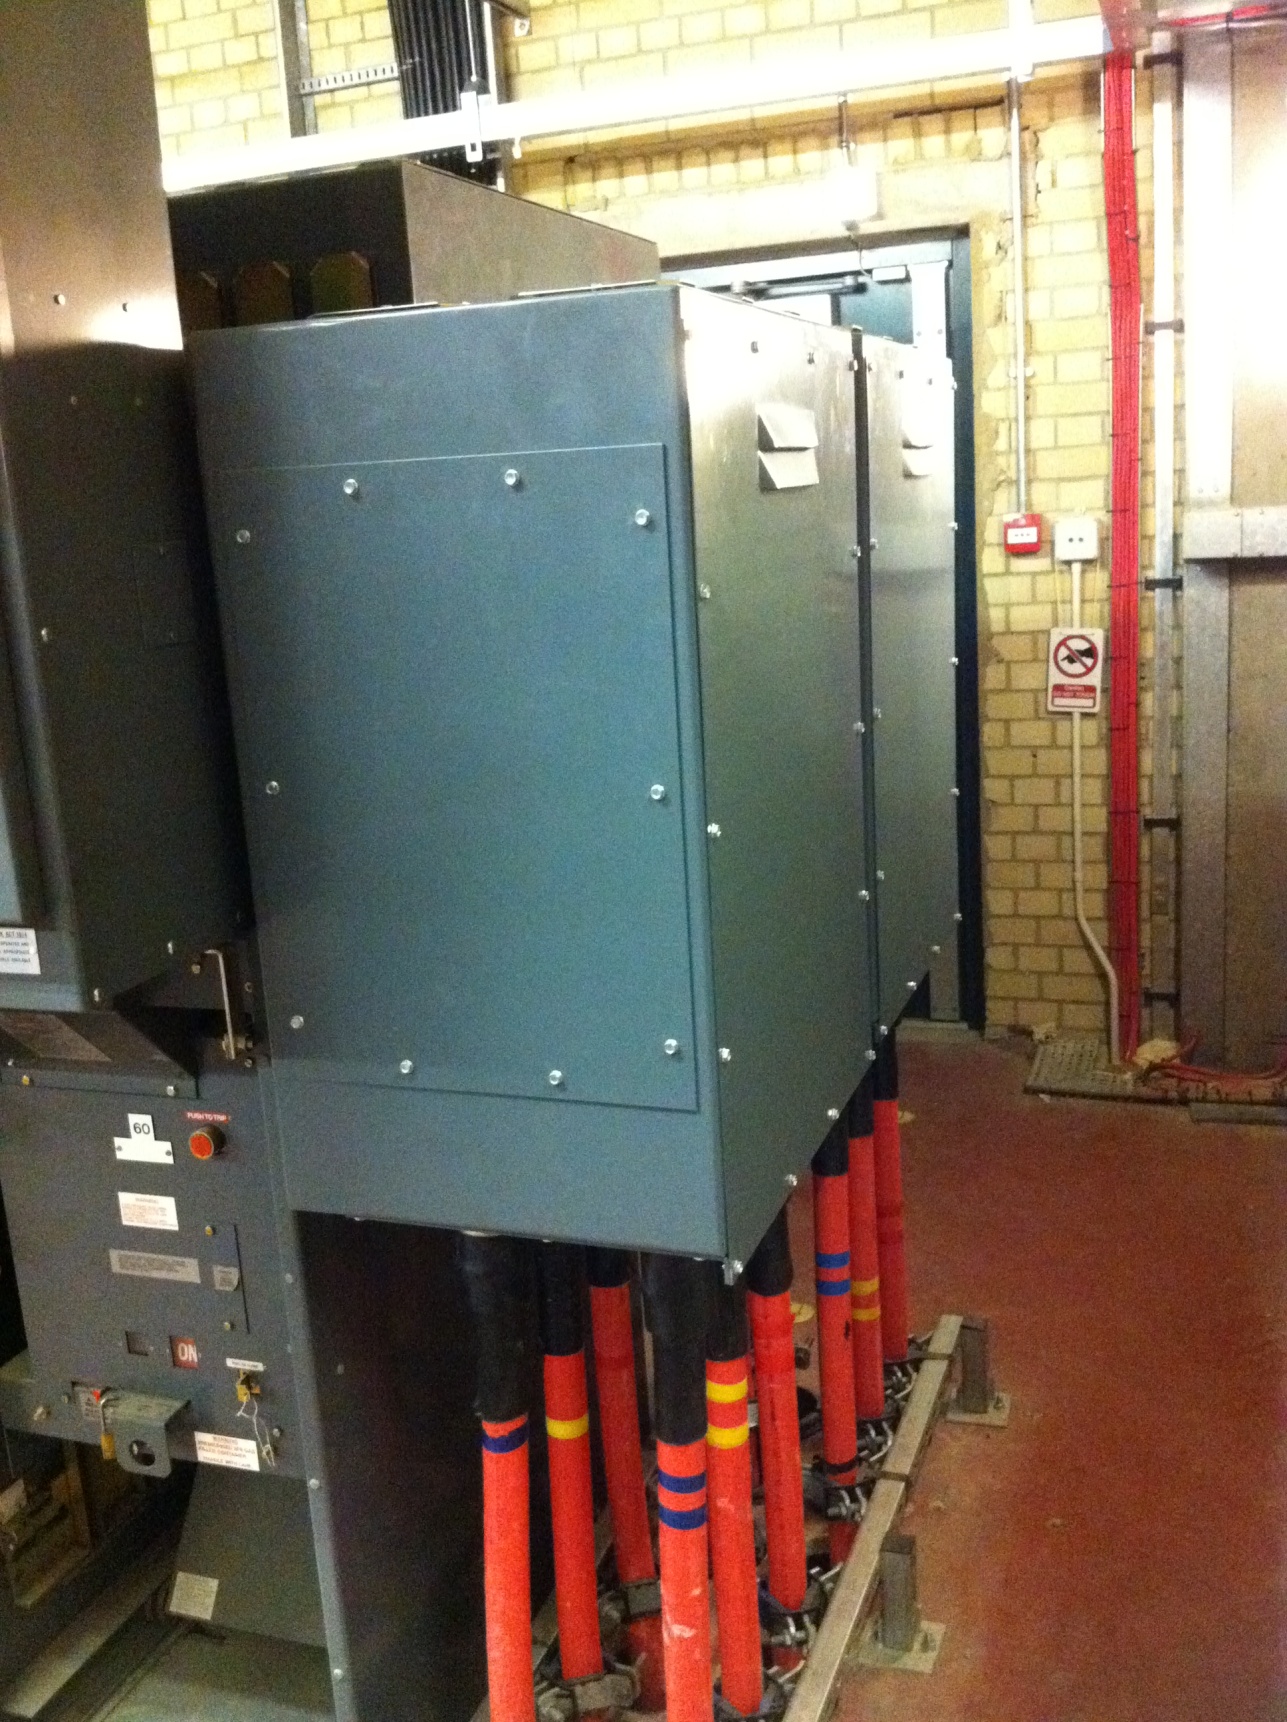 UK Power Networks - Busend Cable Boxes